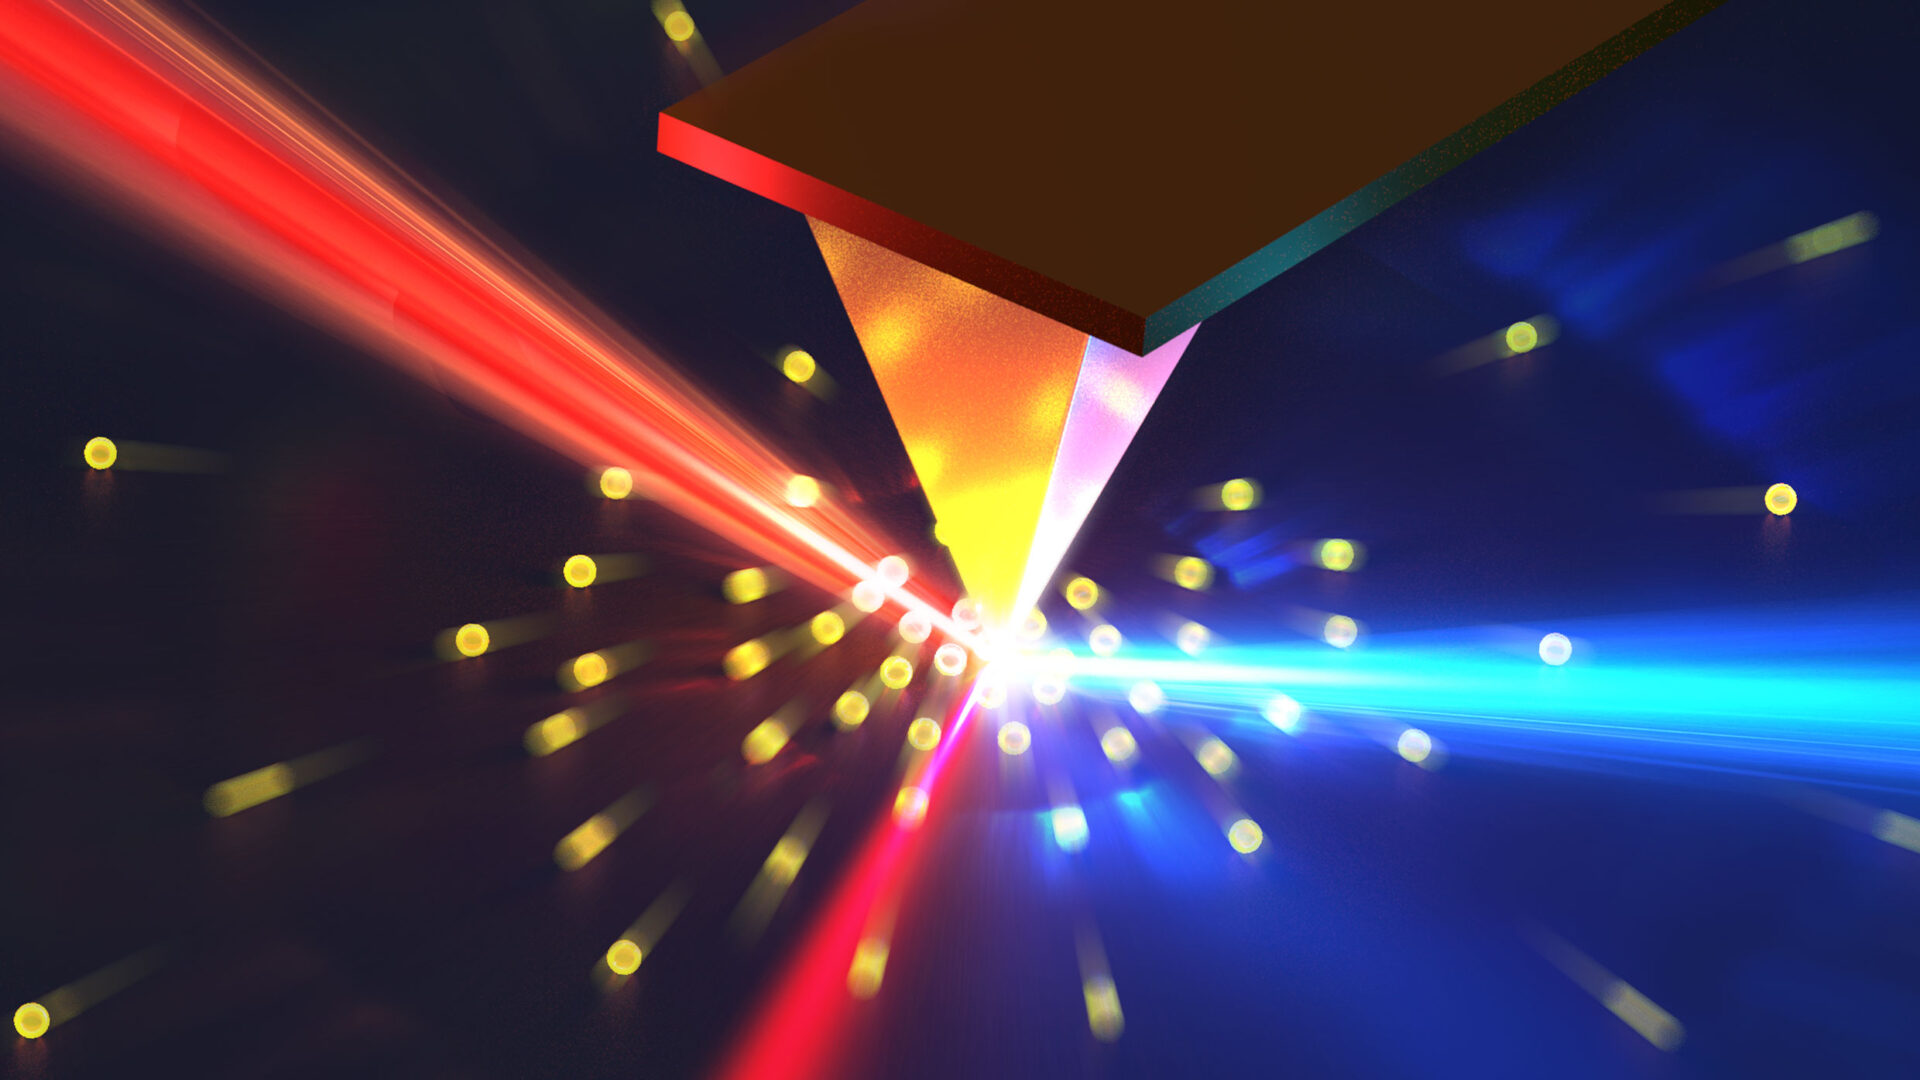 Optical nanoscopy uses laser beams to strike free electrons, scattering light and providing insights into electron distribution and dynamics within semiconductor materials.